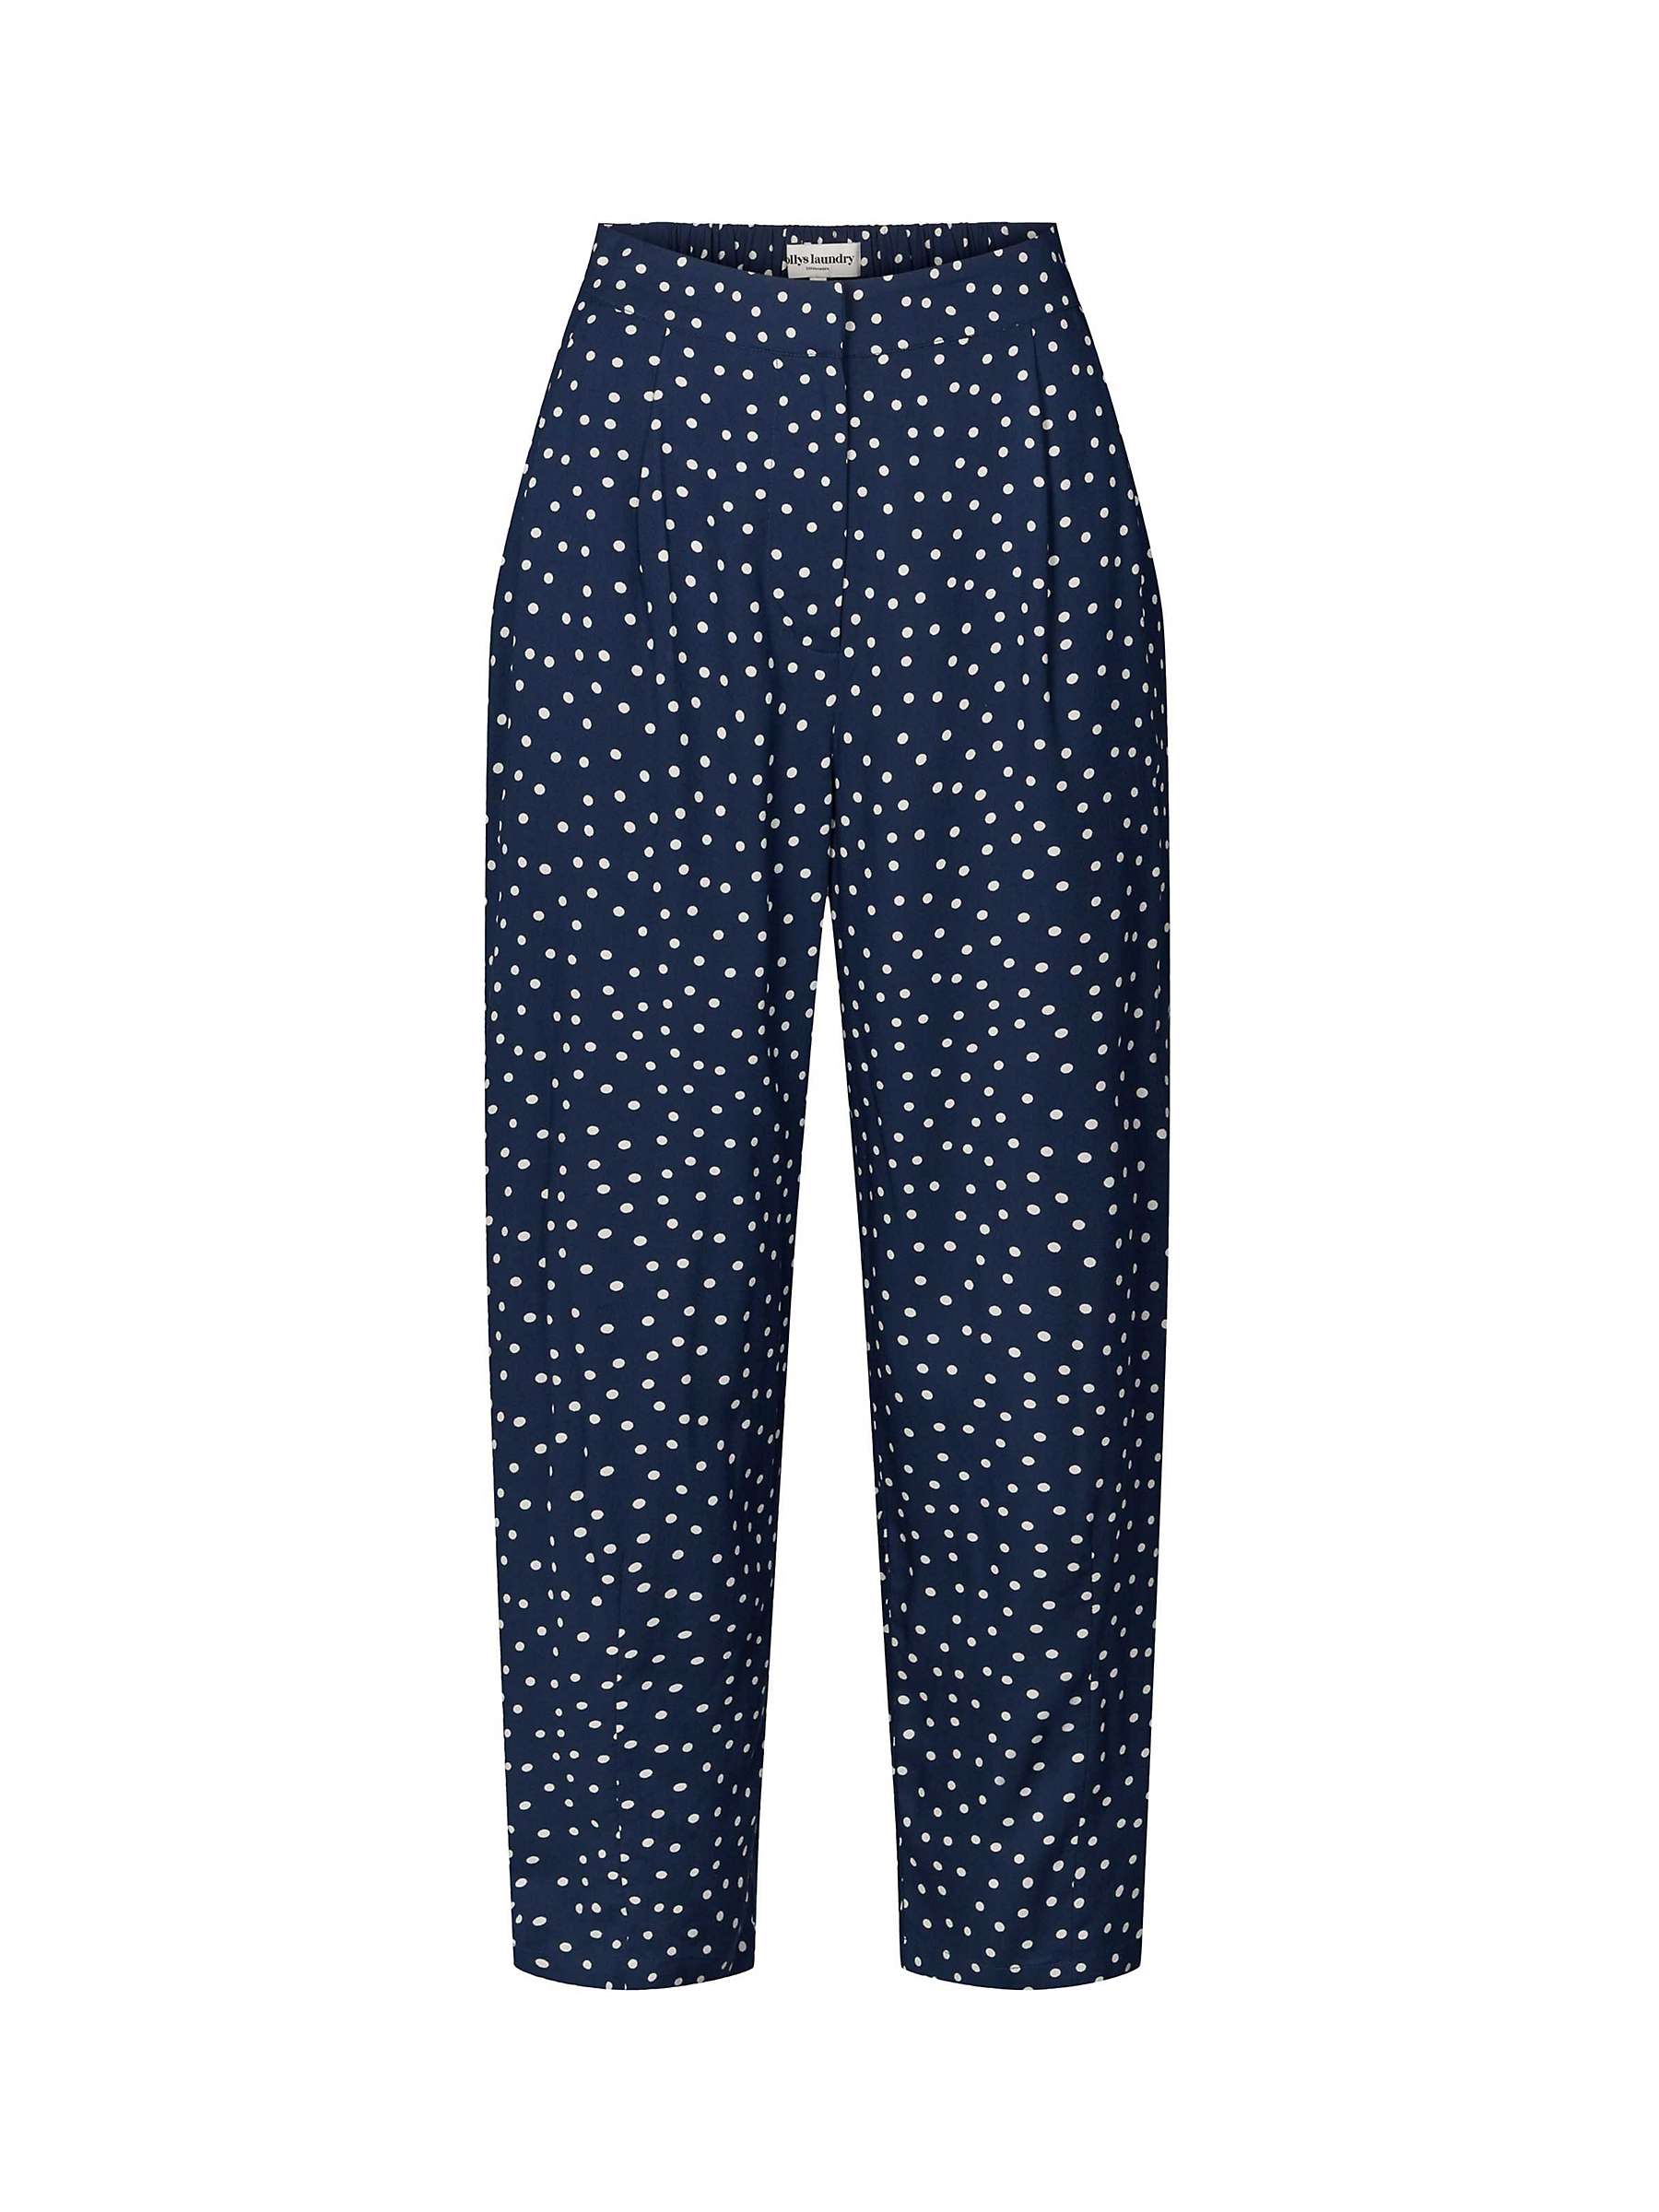 Buy Lollys Laundry Maisie Dot Print Cropped Pleat Trousers, Navy/White Online at johnlewis.com